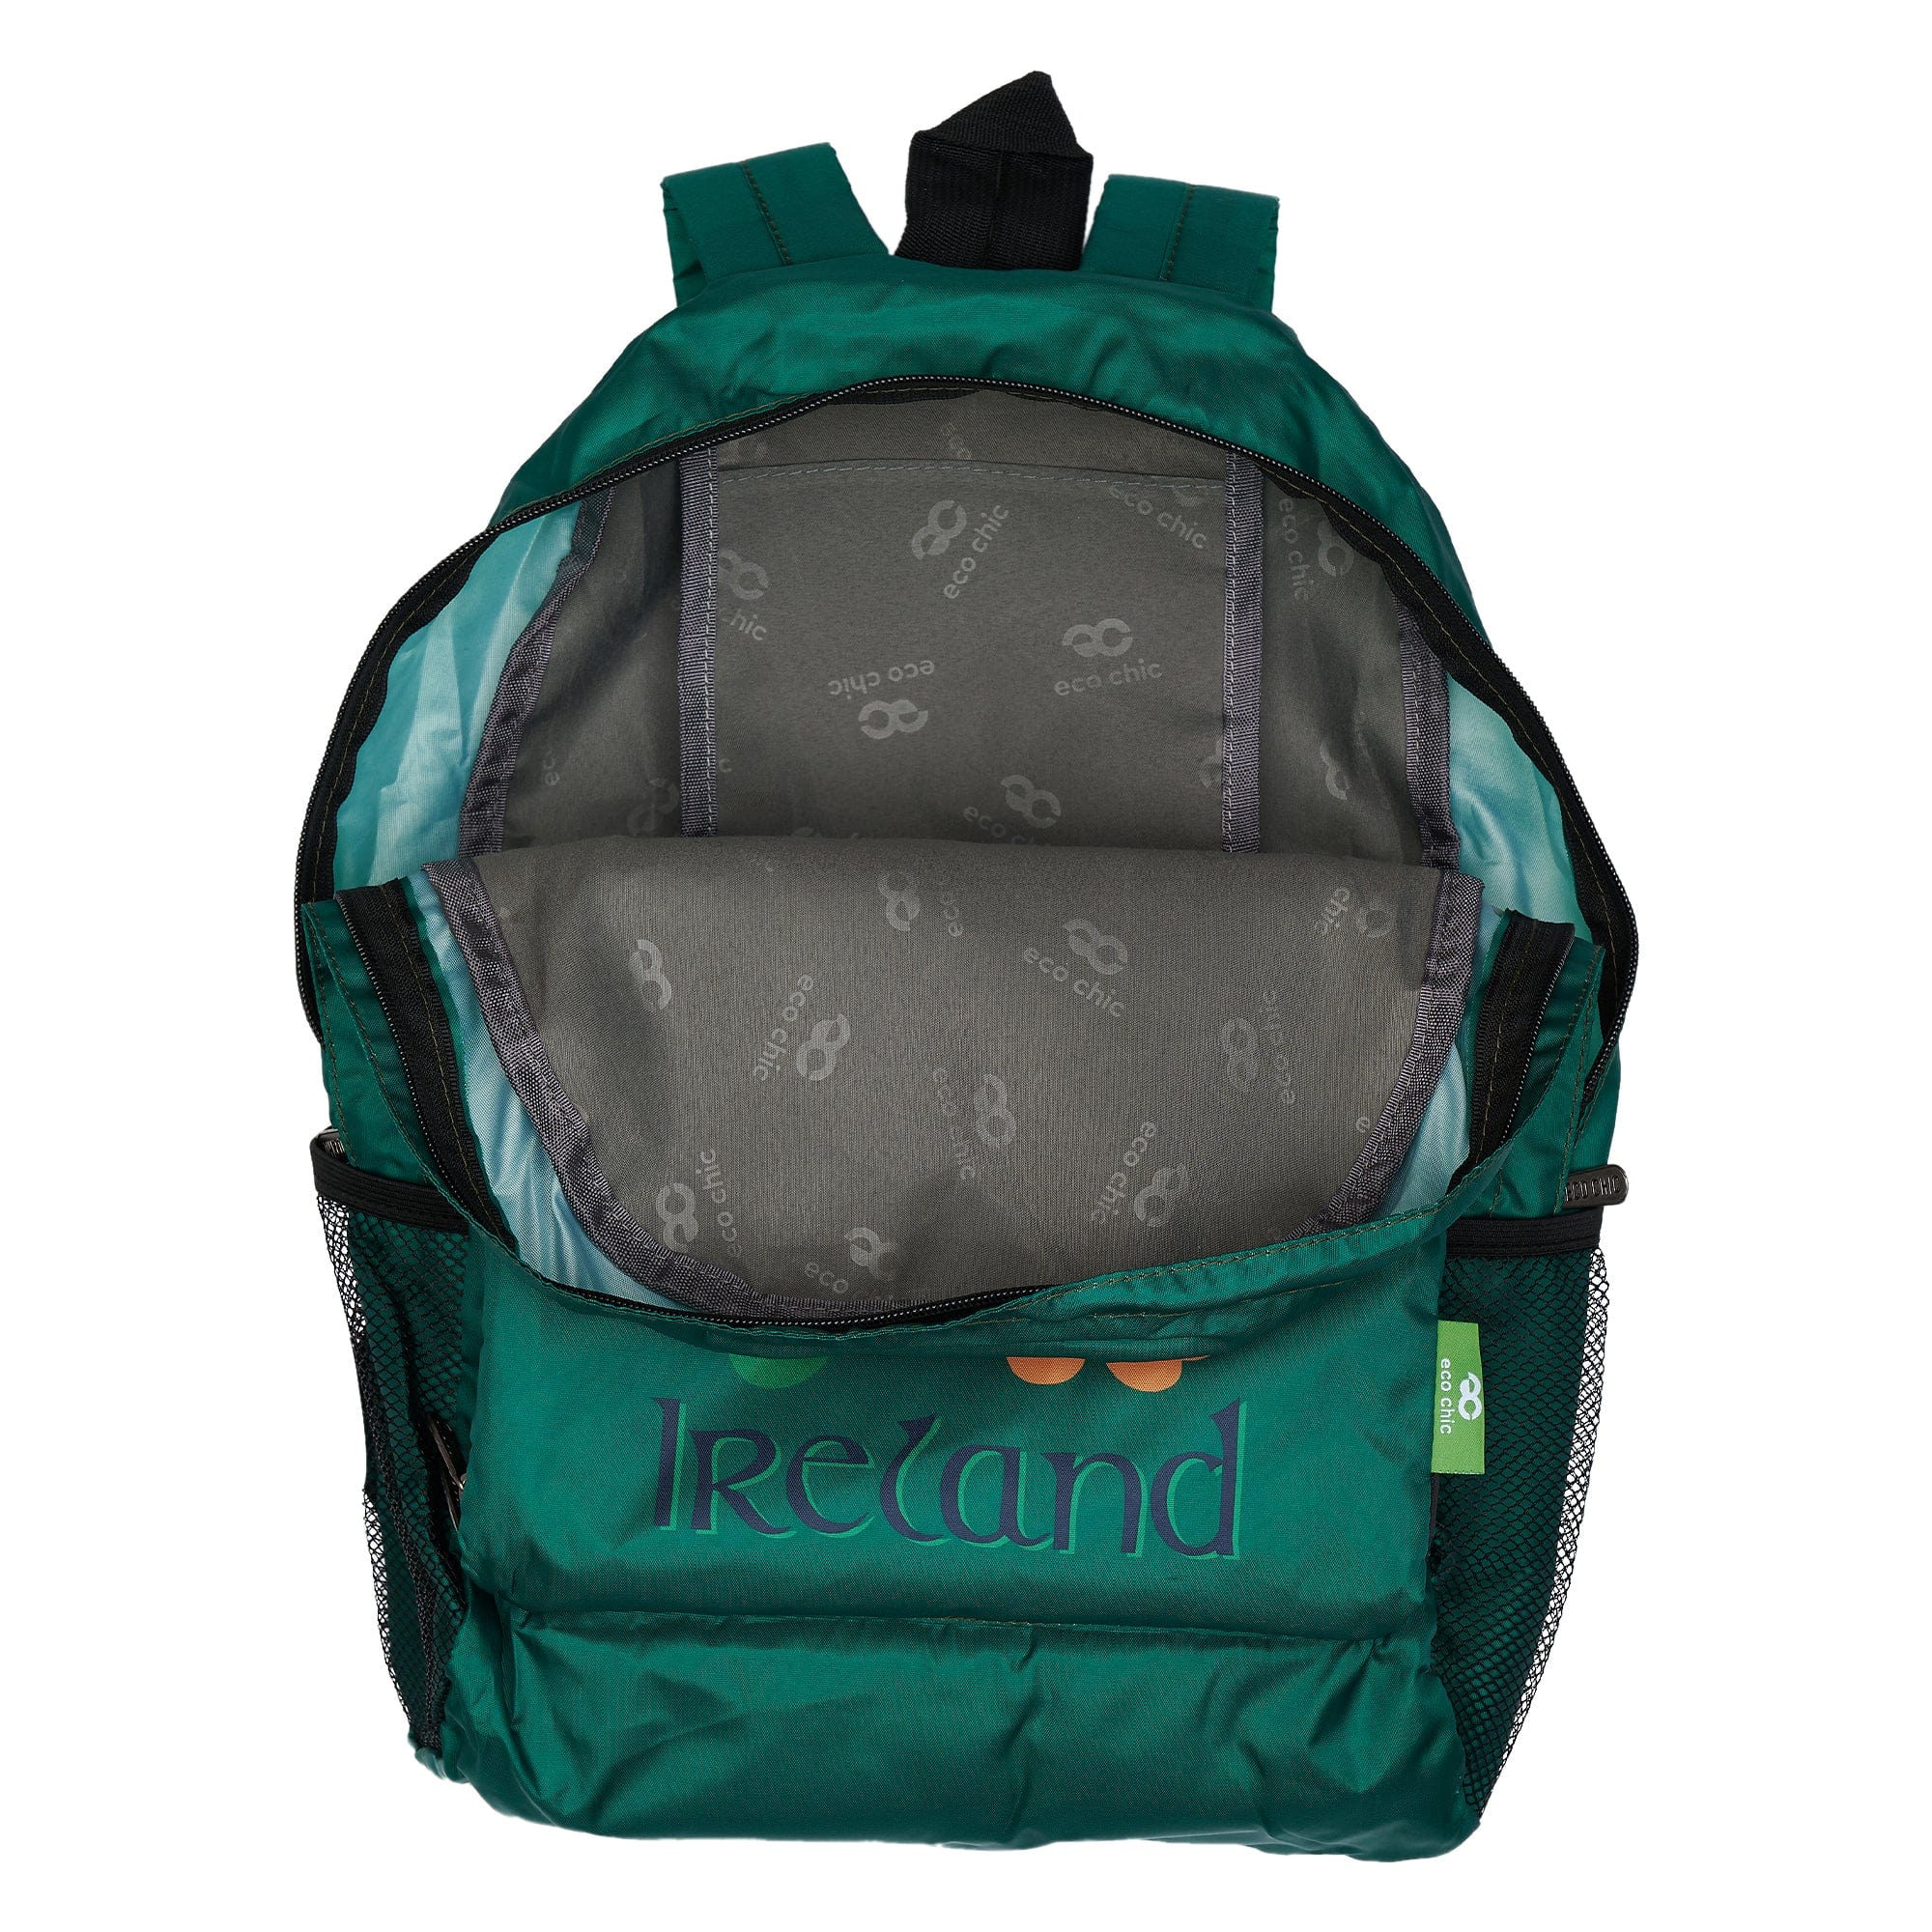 Eco Chic Eco Chic Tourist Collection Foldable Backpack - Ireland